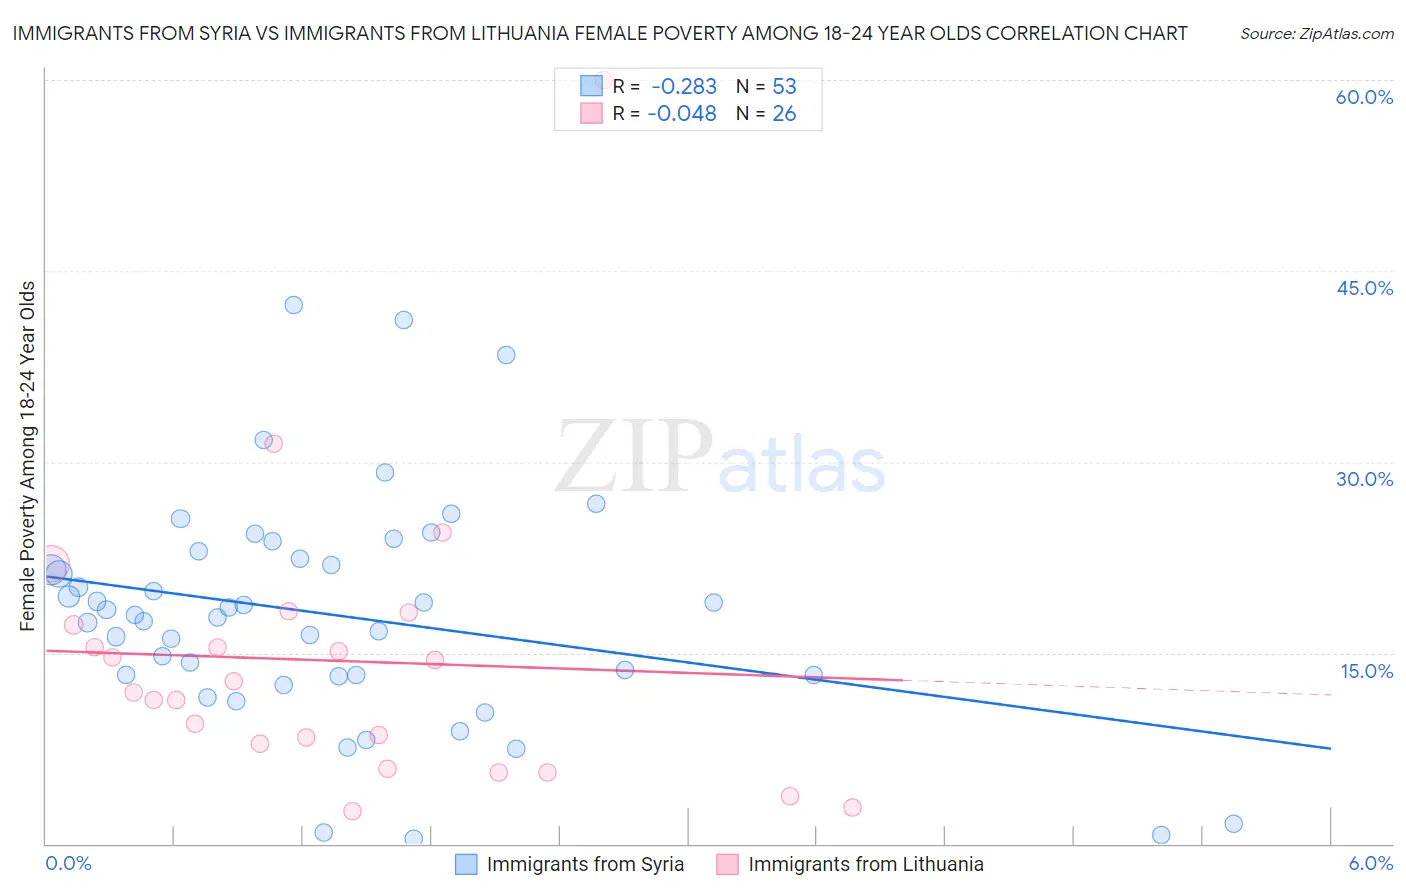 Immigrants from Syria vs Immigrants from Lithuania Female Poverty Among 18-24 Year Olds